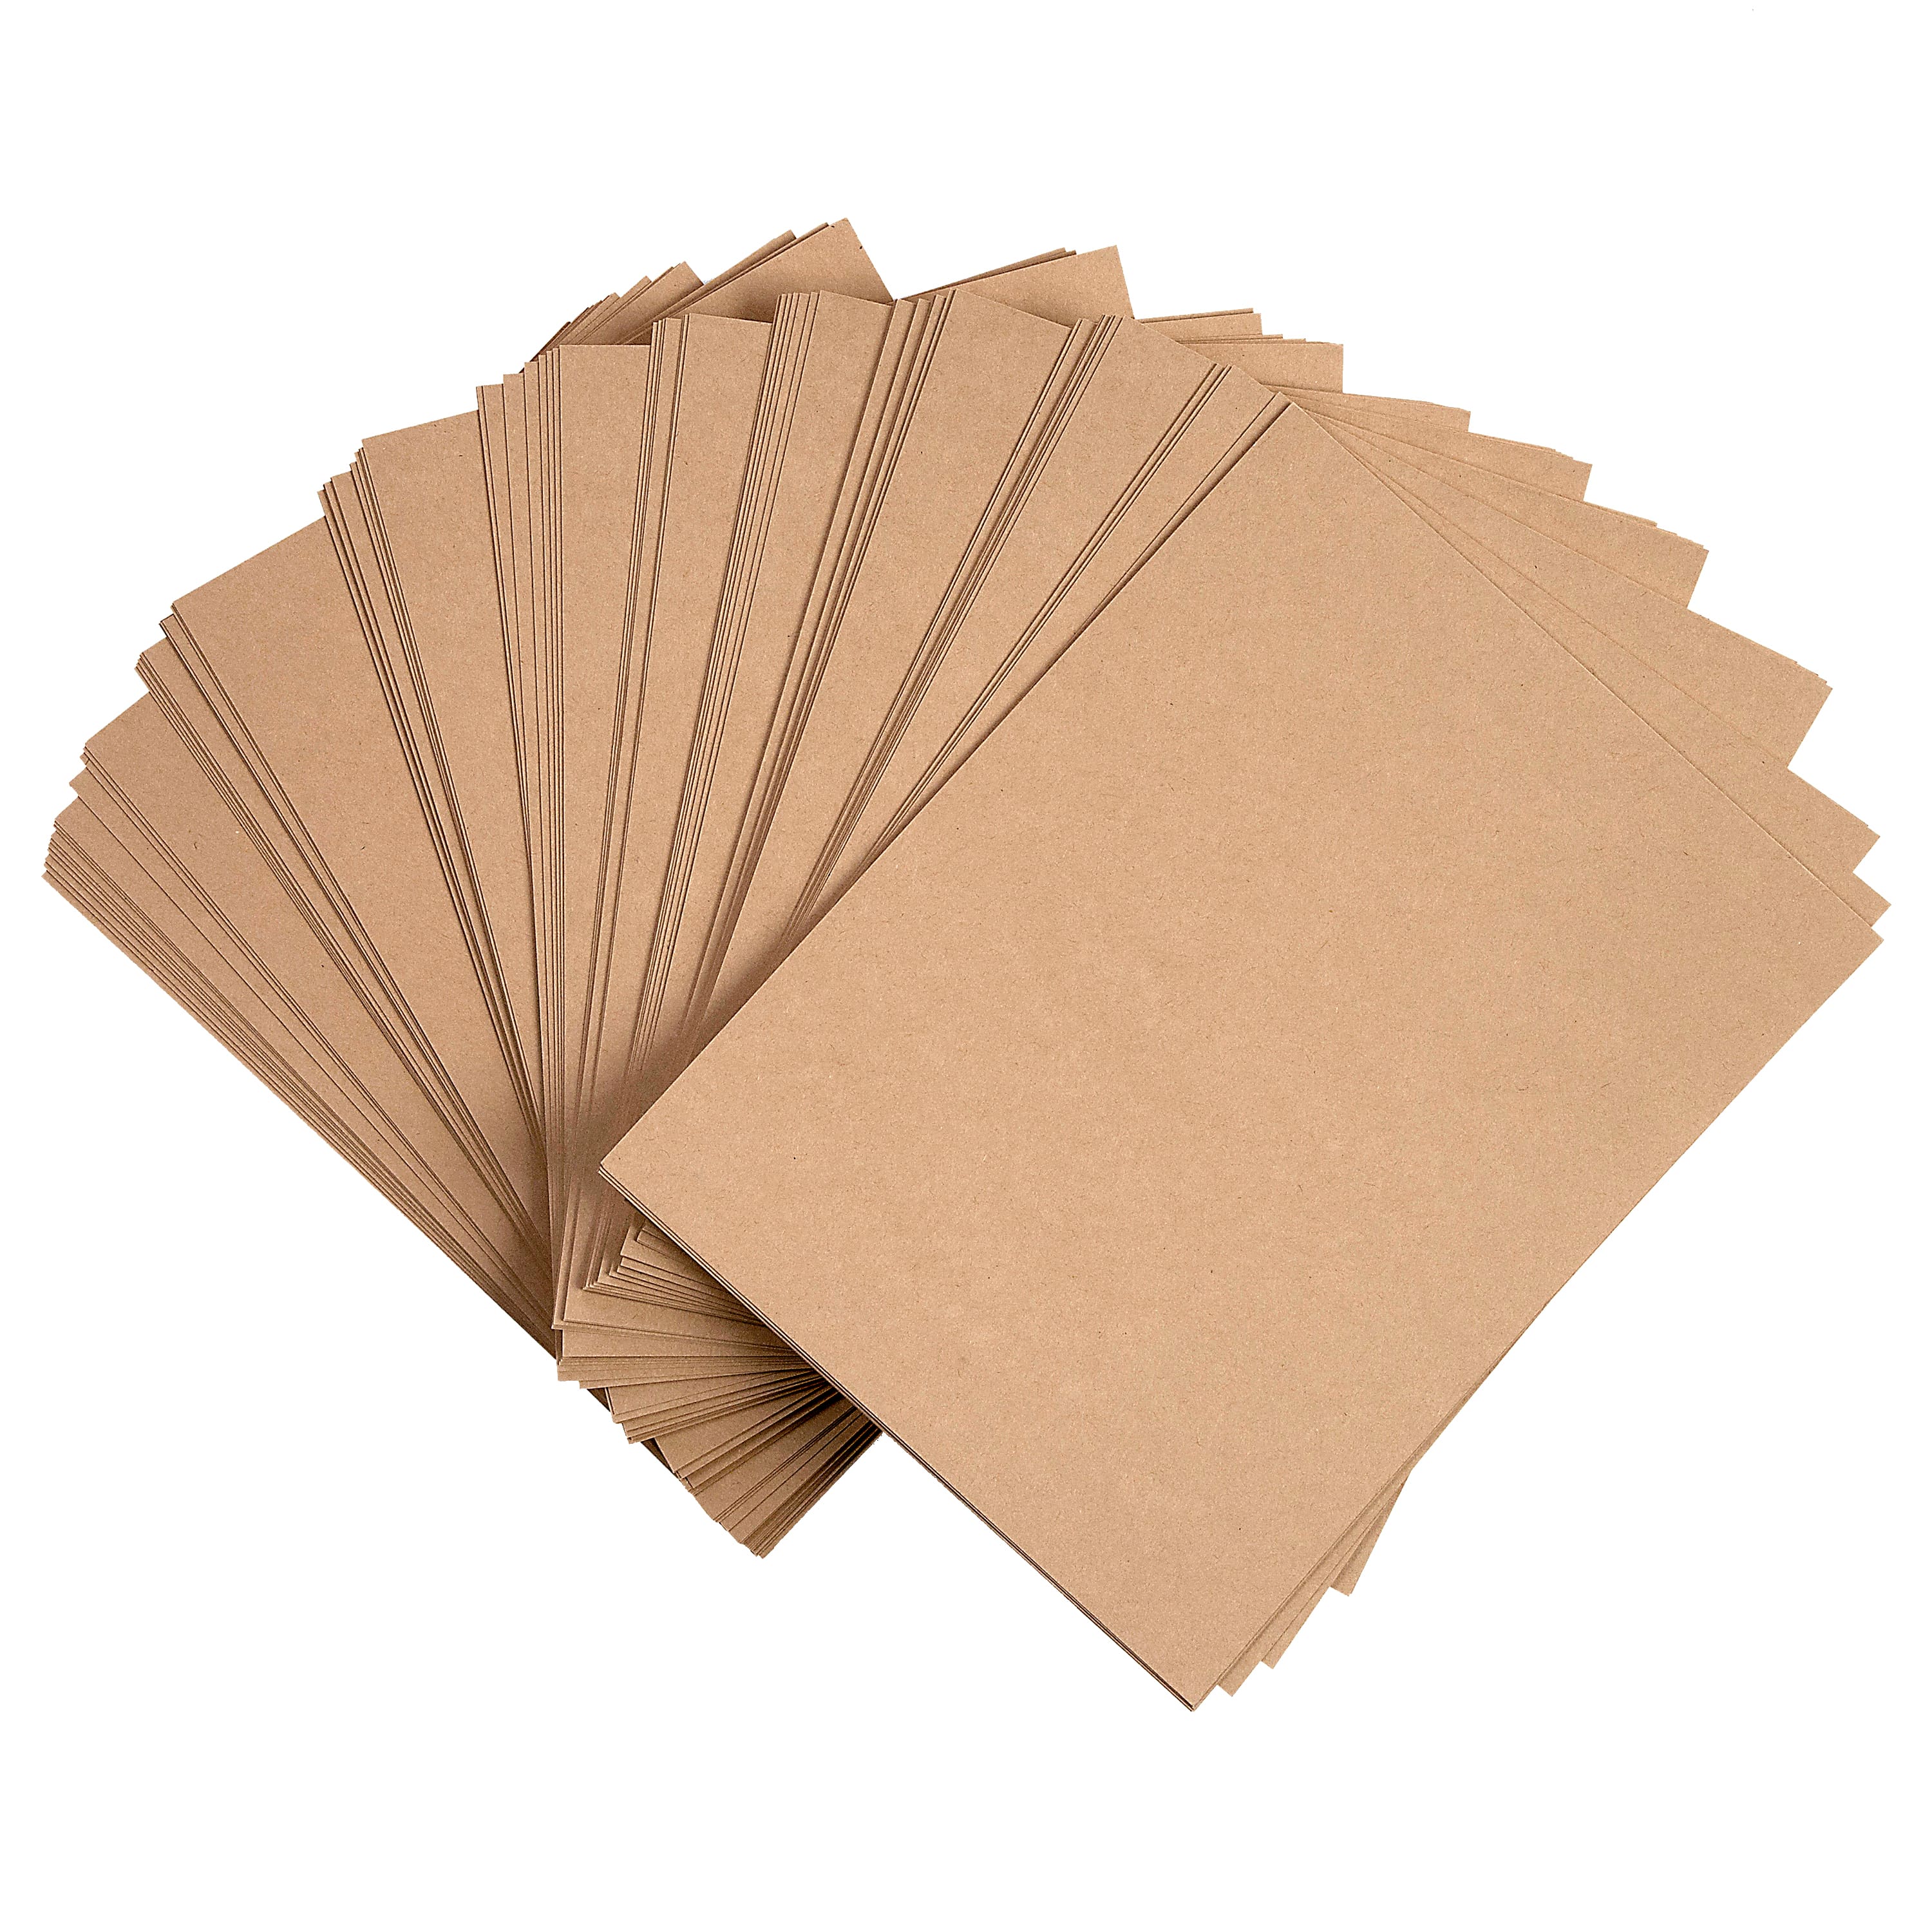 6 Packs: 100 Ct. (600 Total) Black Heavyweight 8.5 inch x 11 inch Cardstock Paper by Recollections, Size: 8.5 x 11